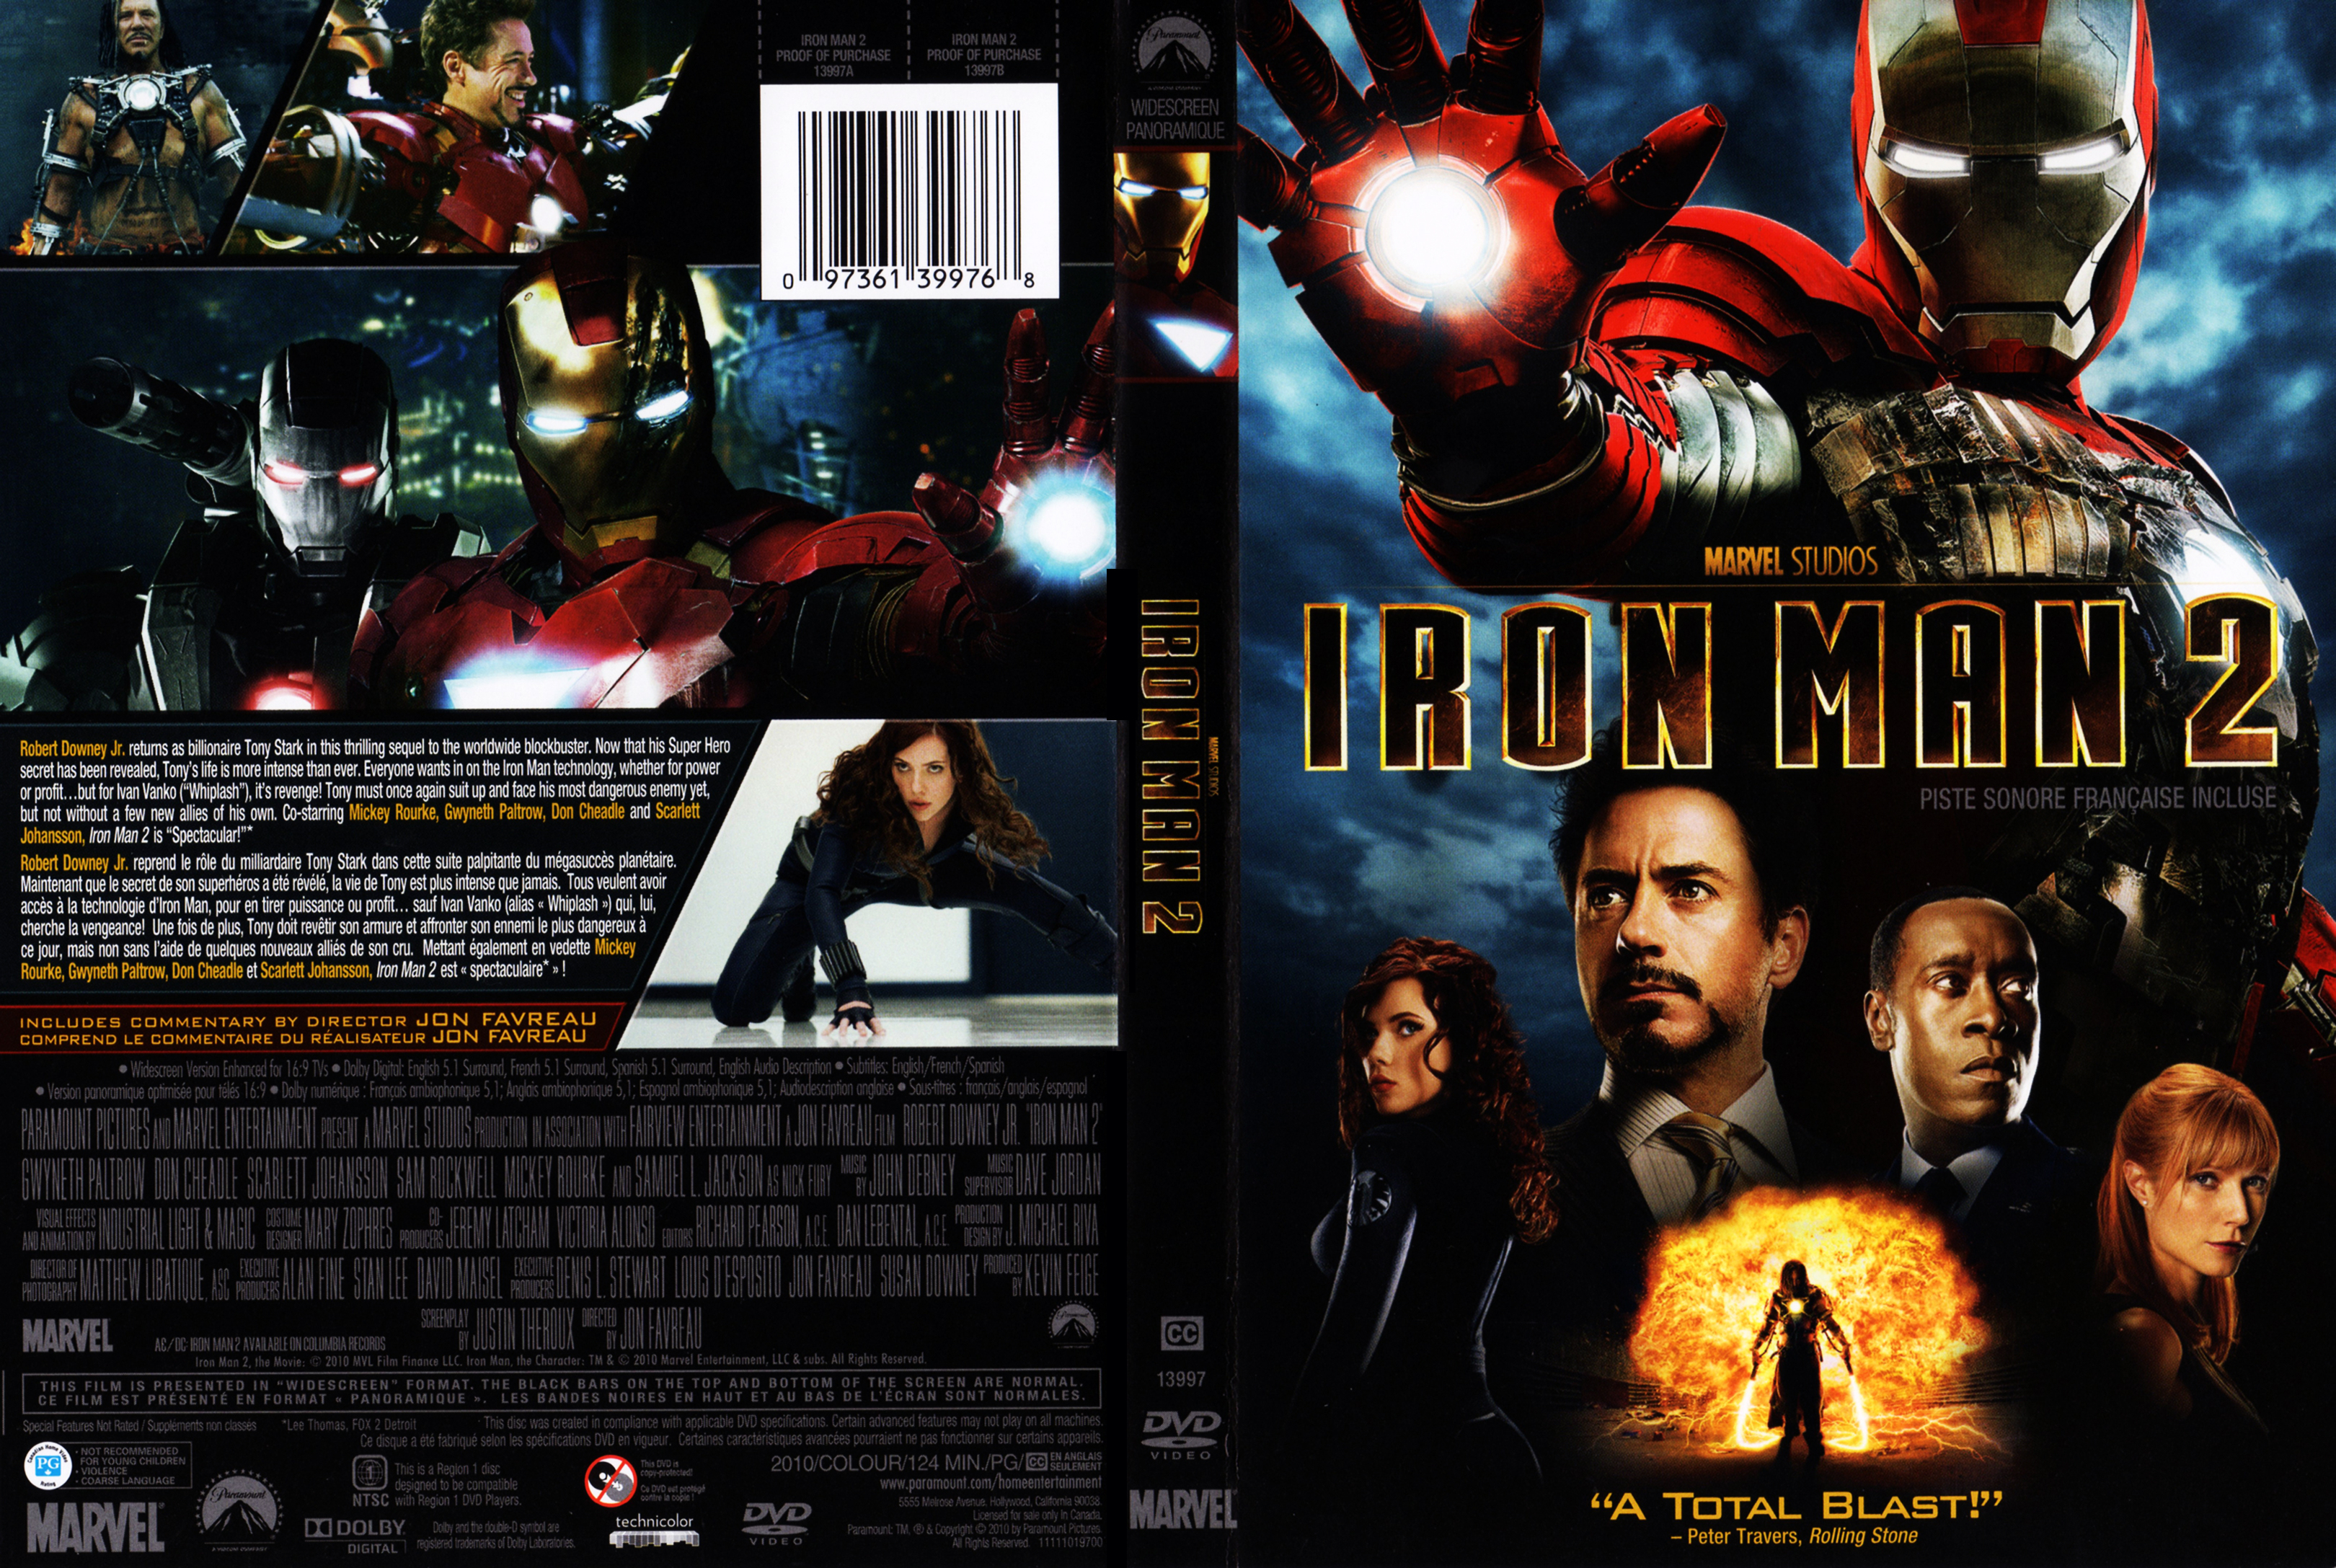 Jaquette DVD Iron man 2 (Canadienne)